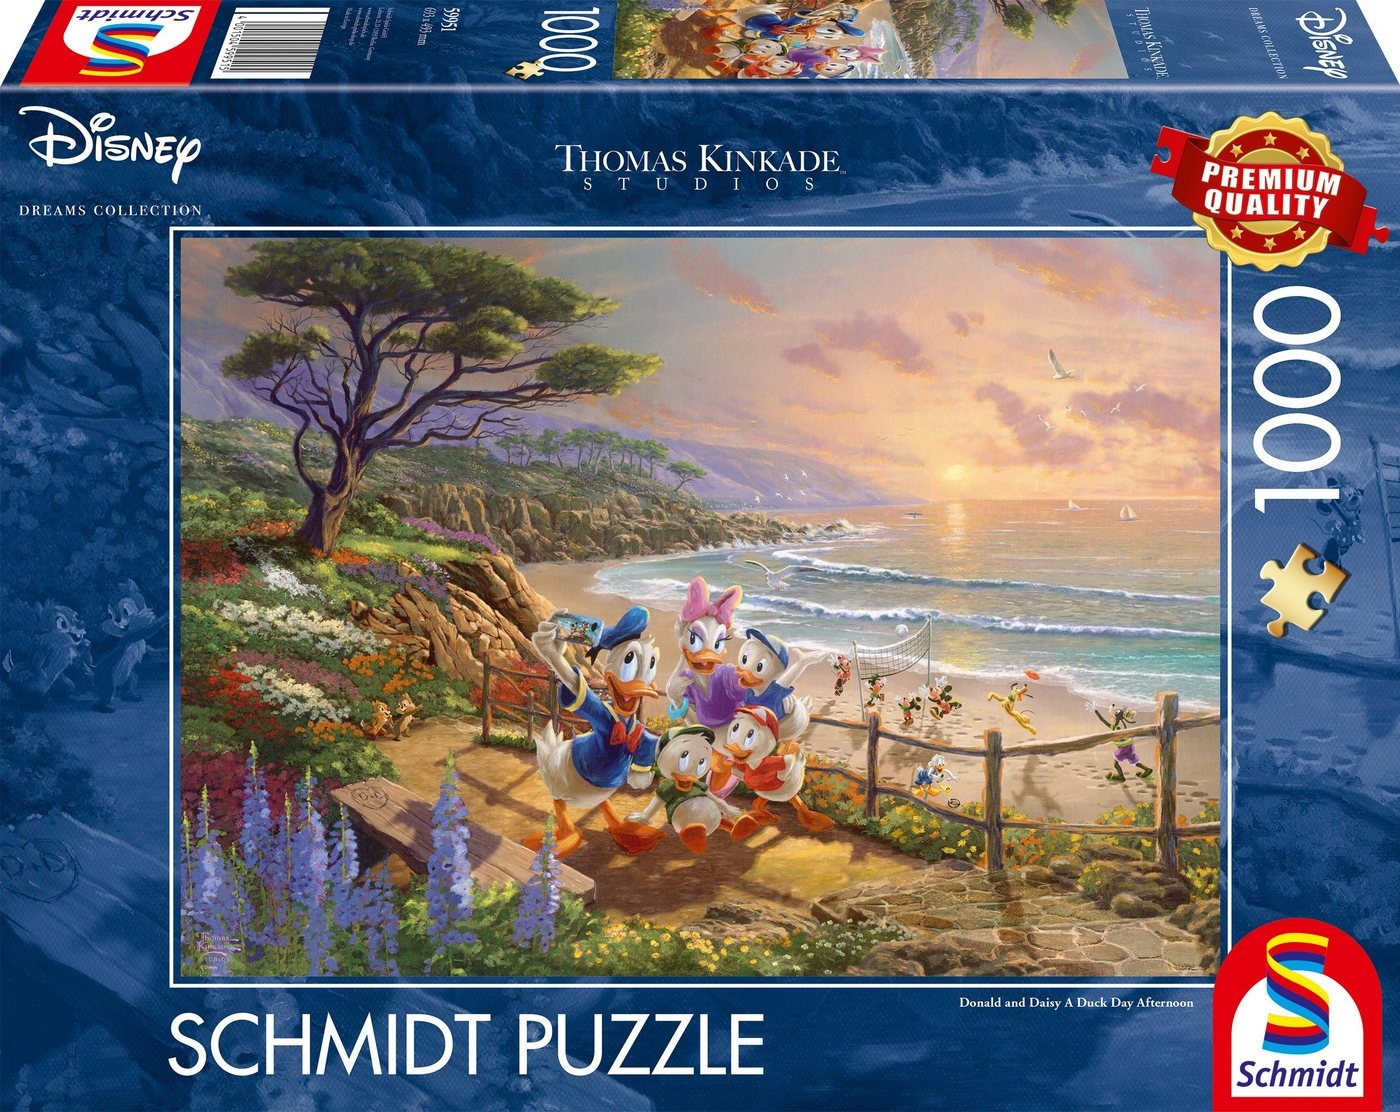 Schmidt Spiele Puzzle Donald & Daisy, A Duck Day Afternoon, 1000 Puzzleteile, Made in Europe bunt